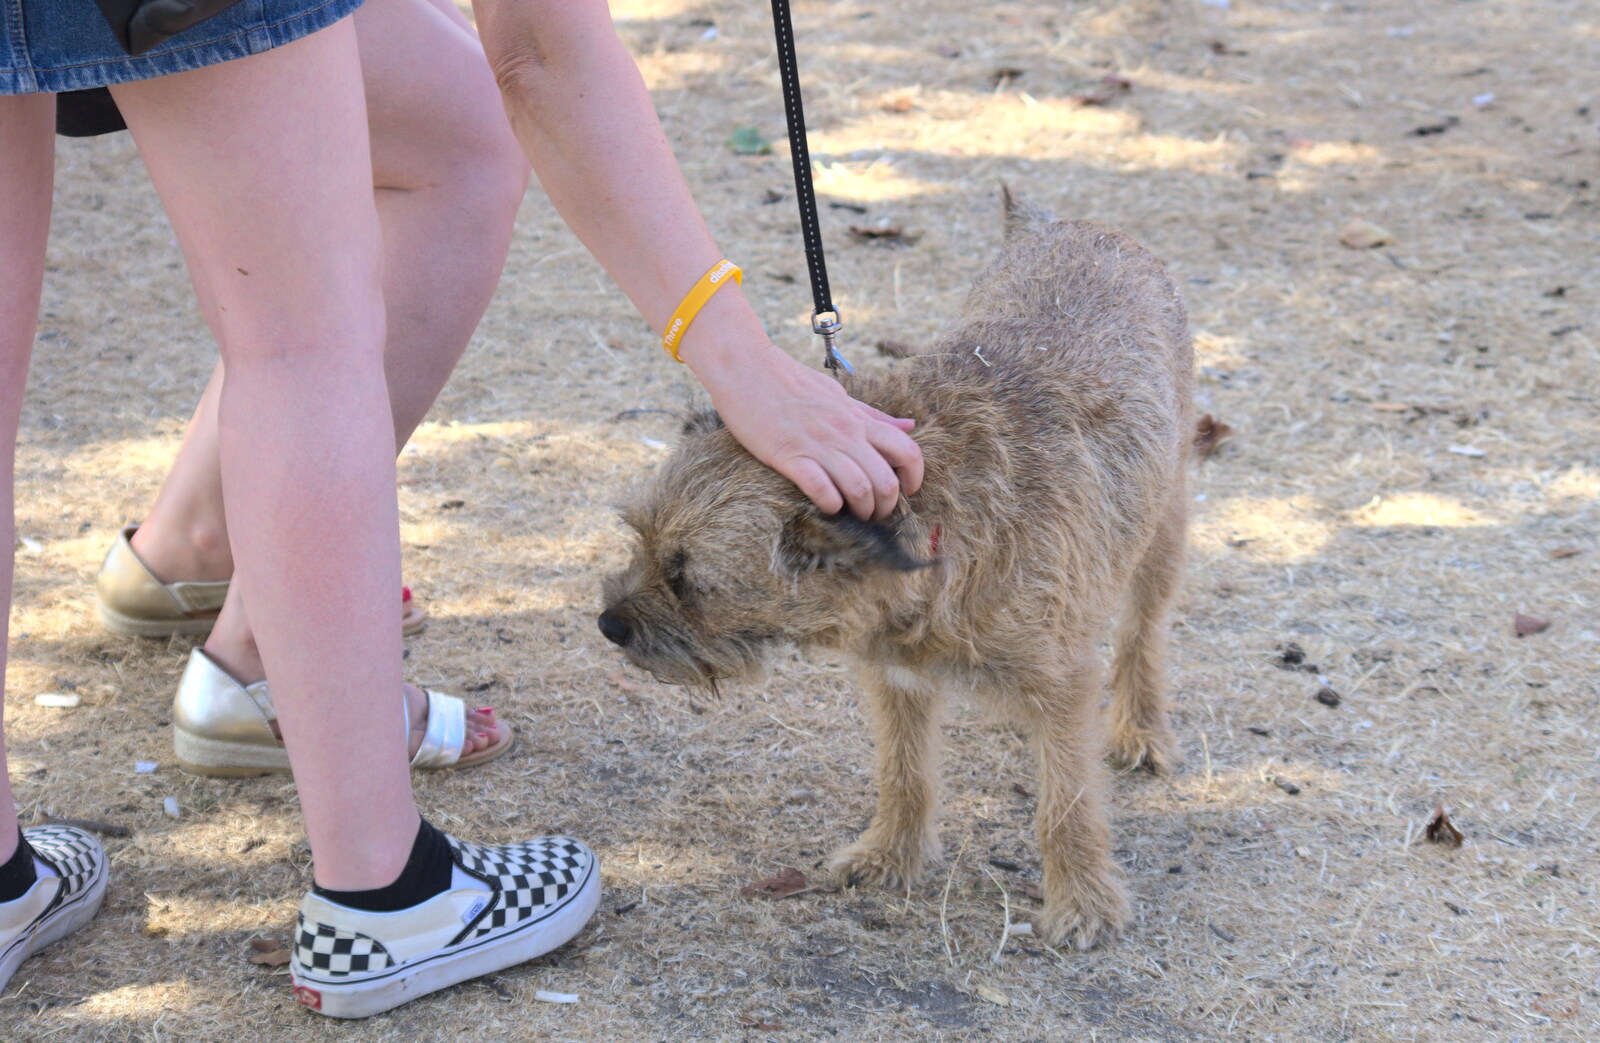 A scruffy dog gets a scratch from Diss Fest, The Park, Diss, Norfolk - 22nd July 2018